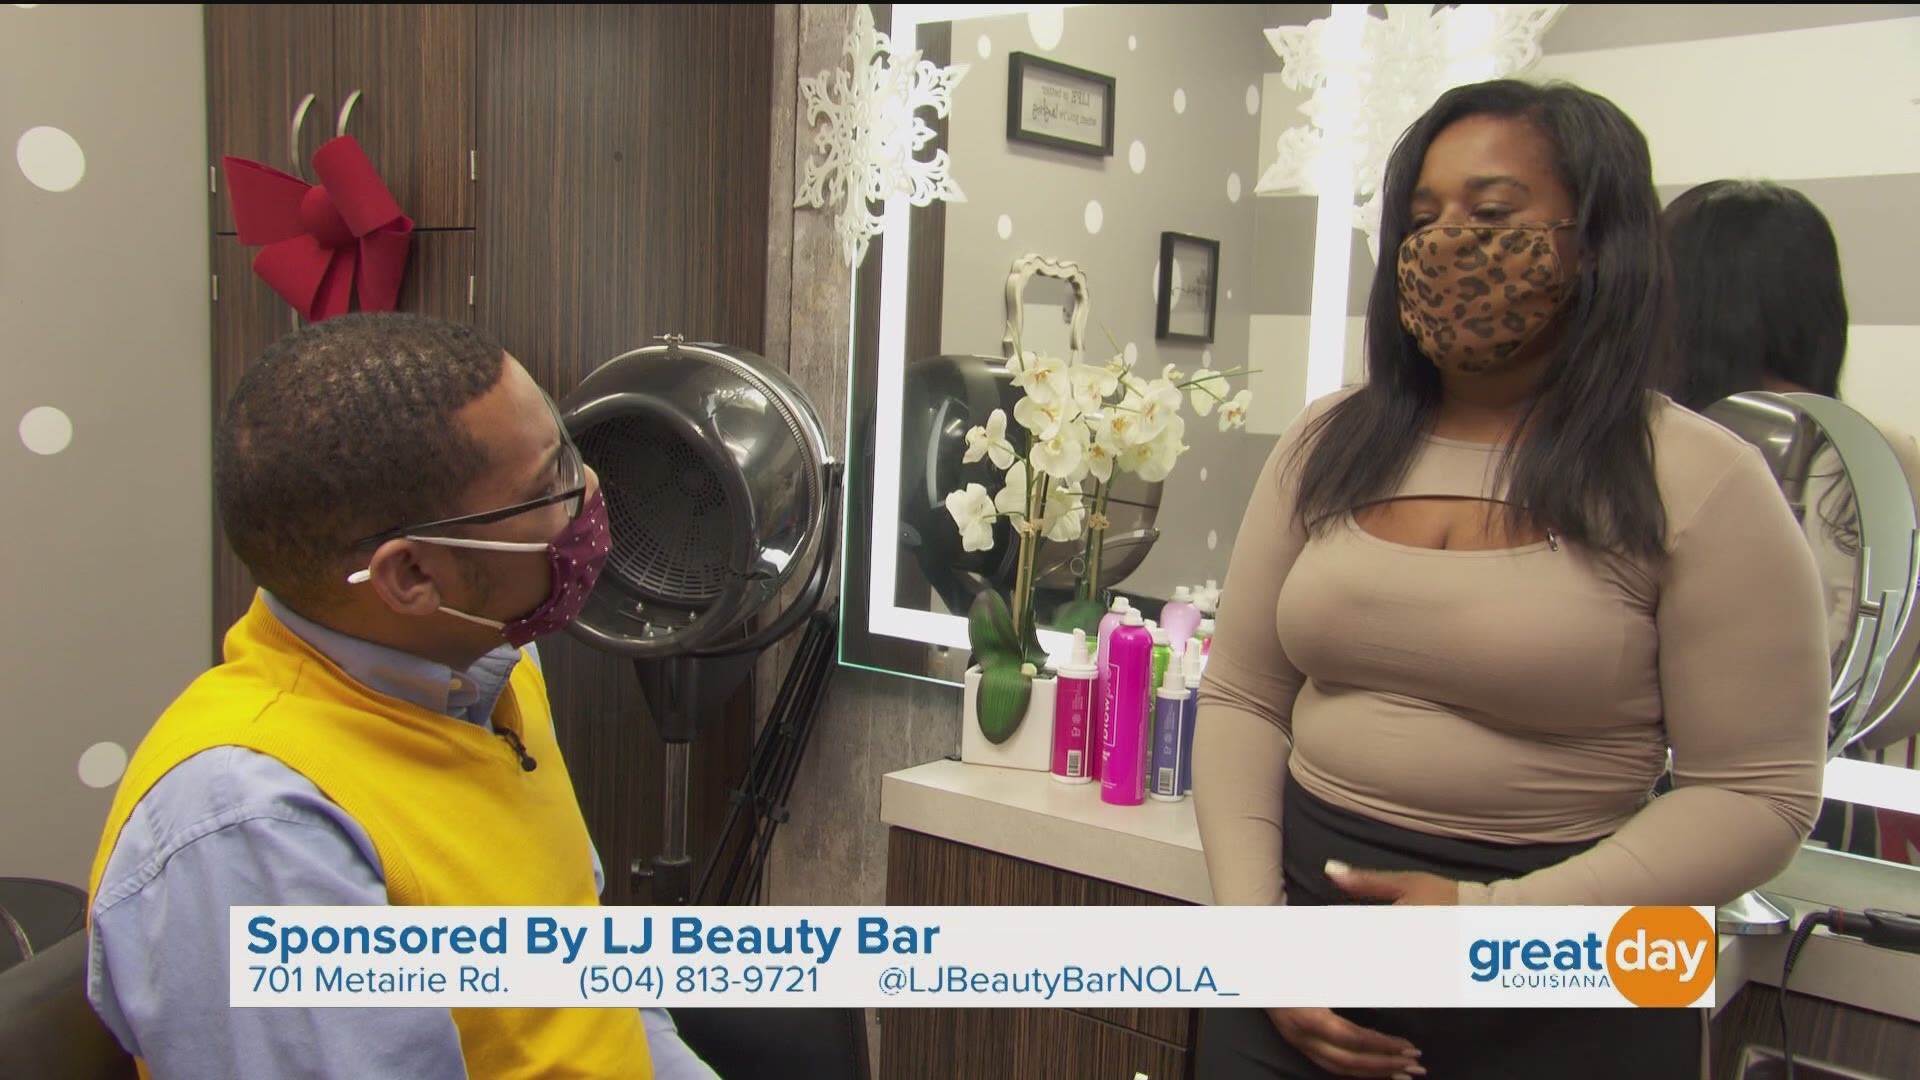 From curls to clip-ins and blowouts to braids, Shalanta Jackson is back in Metairie in her new salon, LJ beautybar! To make an appointment, call 504-813-9721